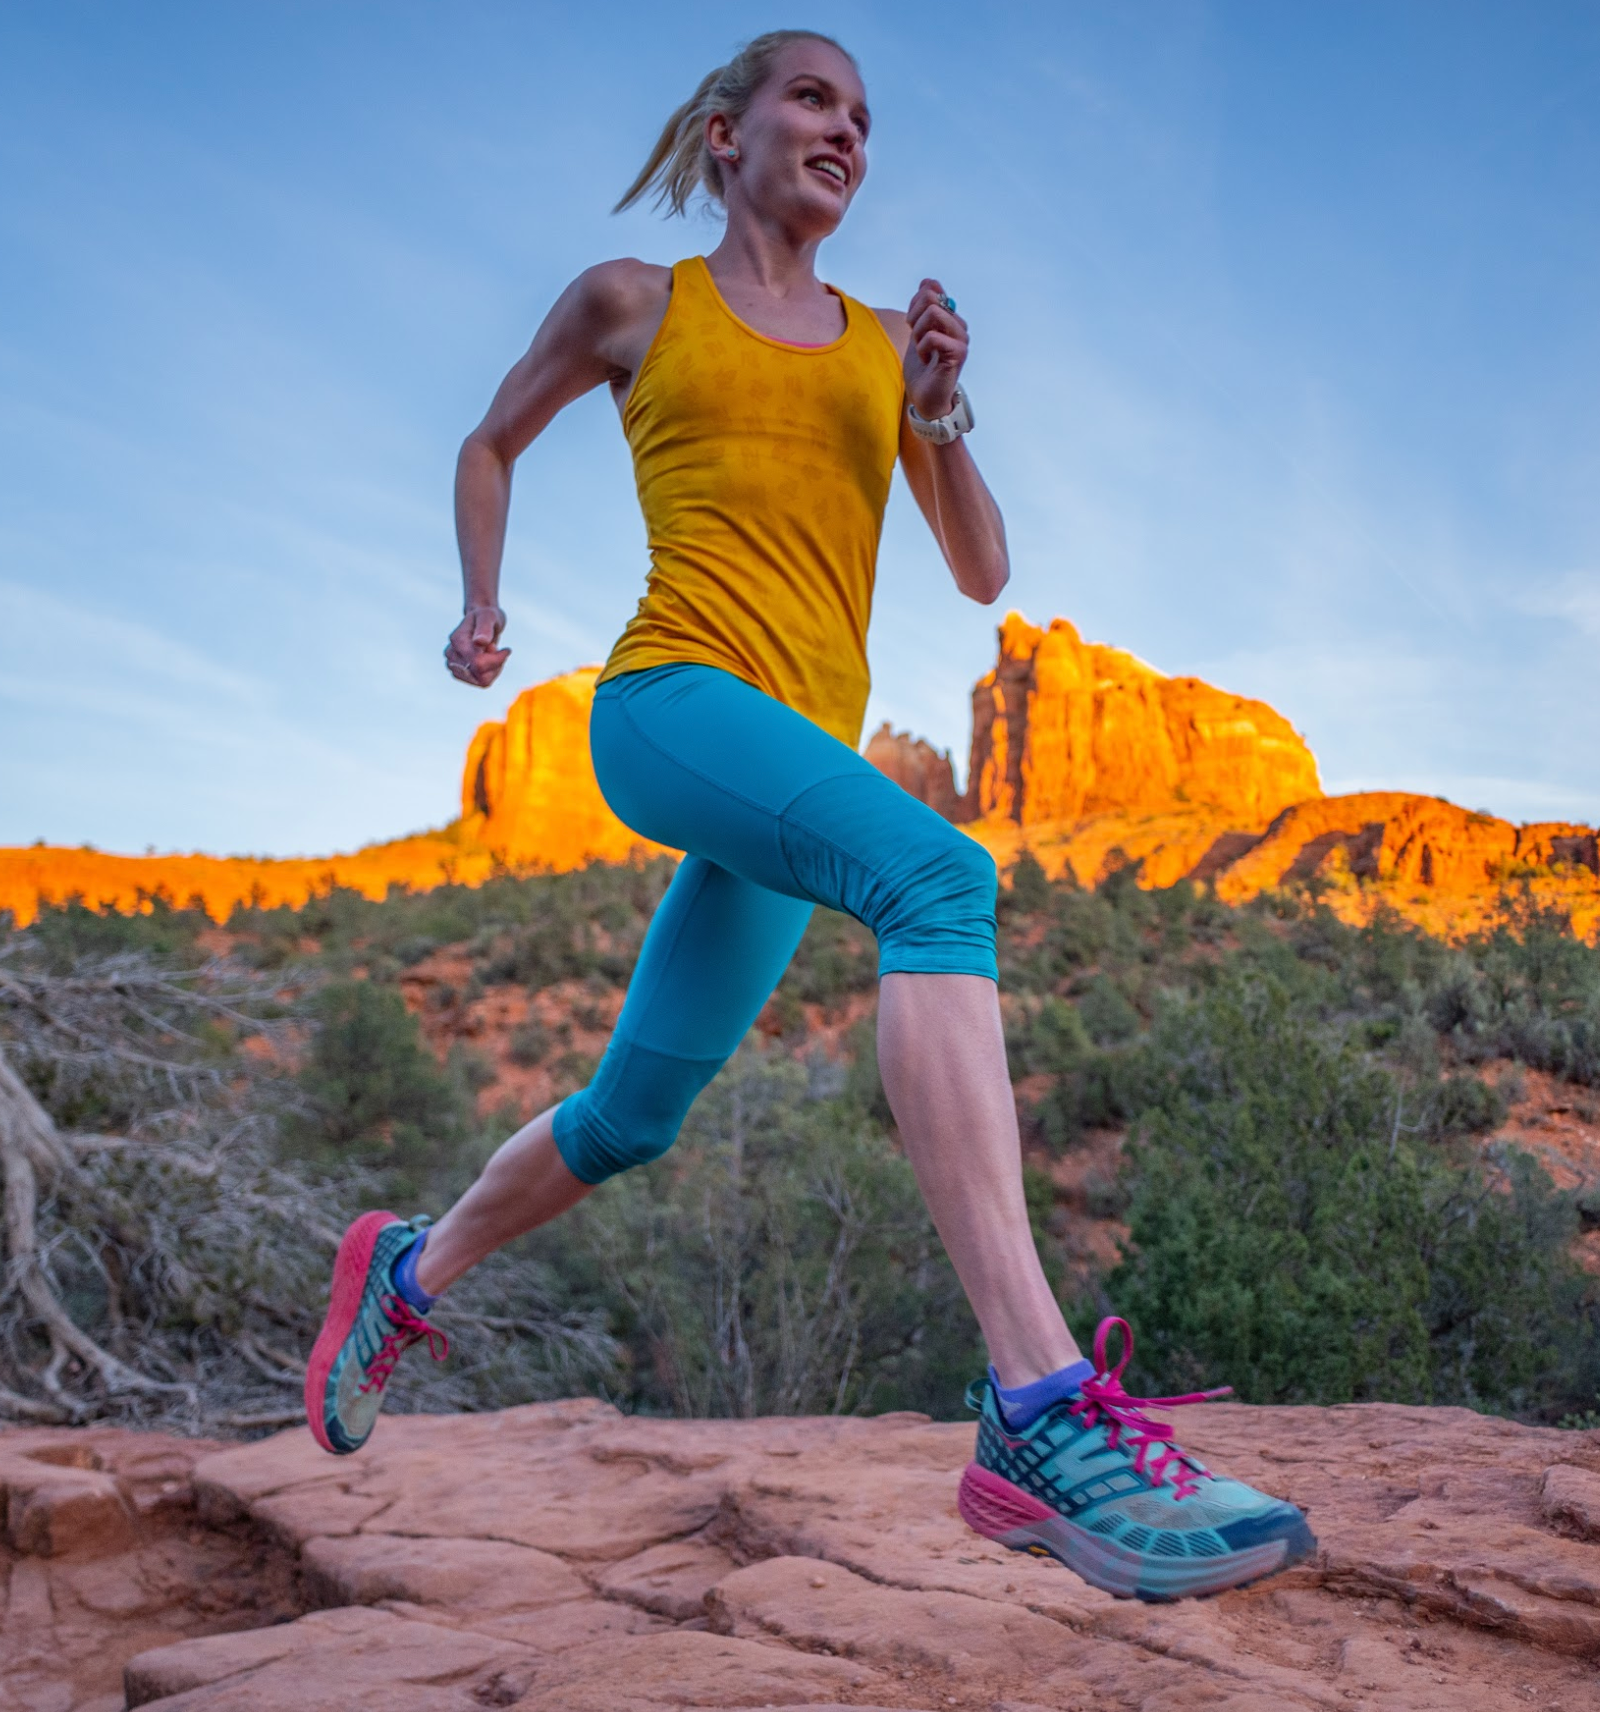 R2R2R To rabbit—Grand Canyon FKT Record Holder Taylor Nowlin Signs With California Apparel Company